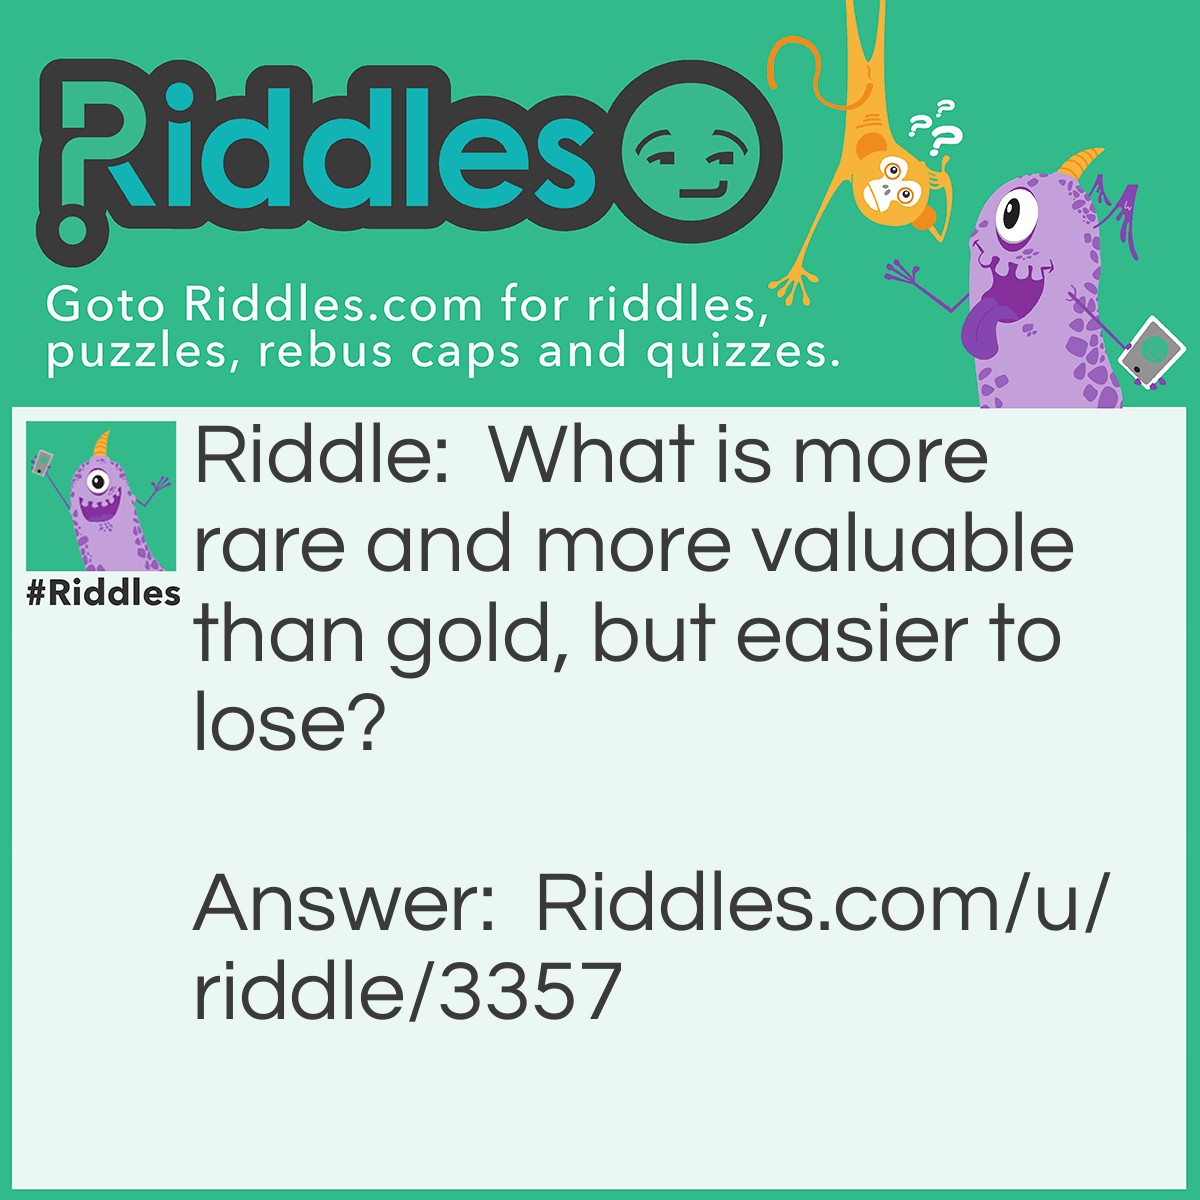 Riddle: What is rarer and more valuable than gold, but easier to lose? Answer: Love/ Friendship.